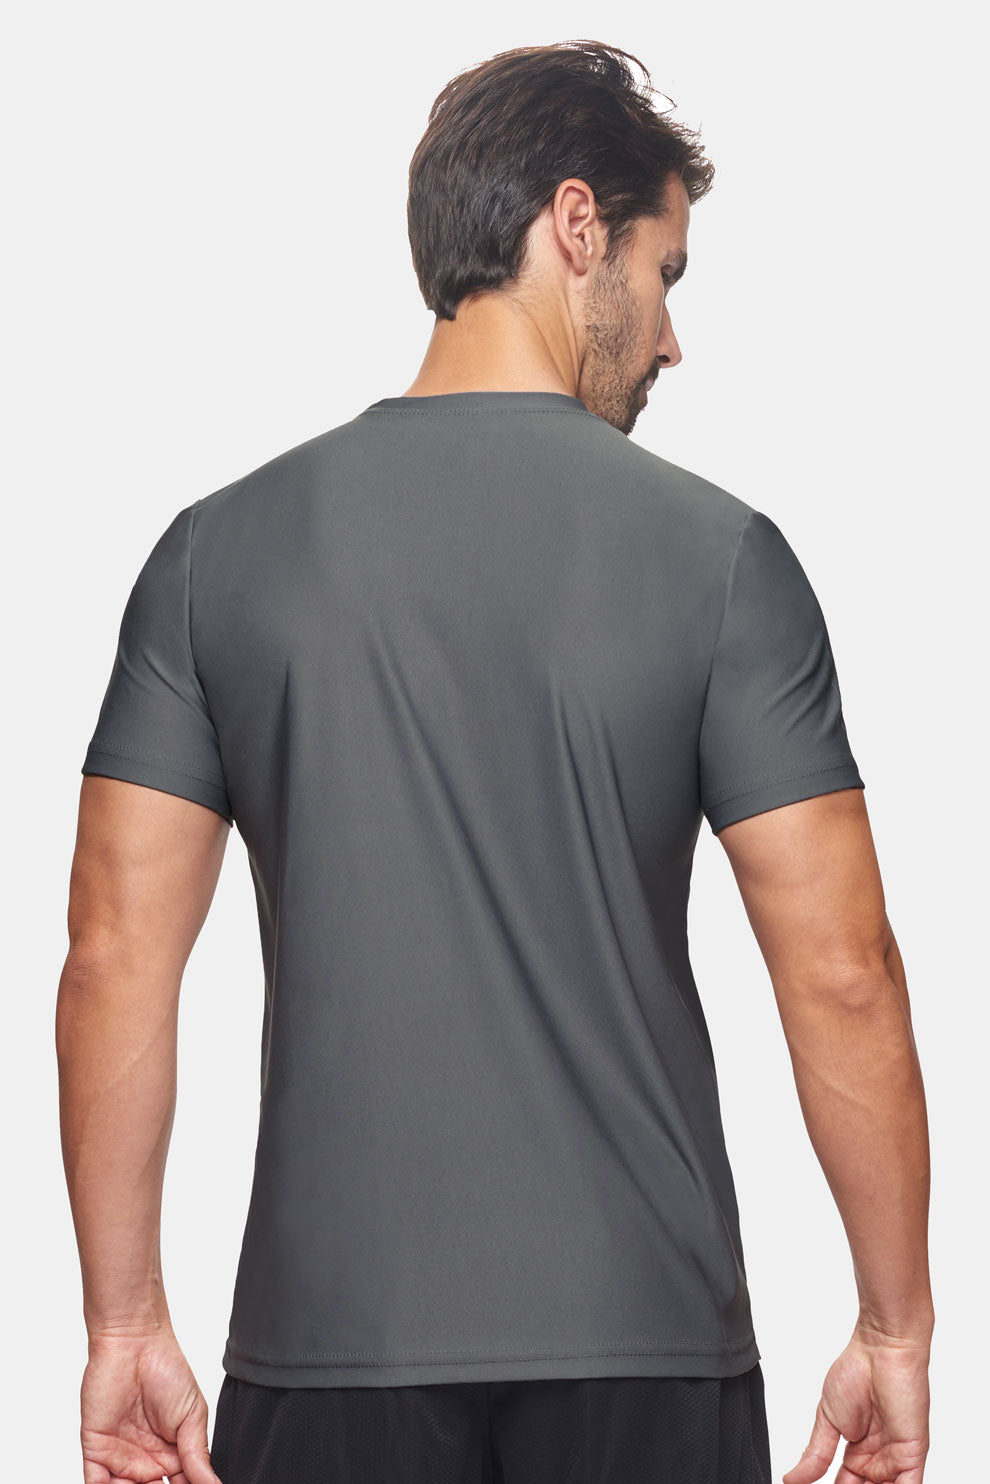 EcoTek Recycled Performance Tee Expert Brand Apparel image 3#color_charcoal